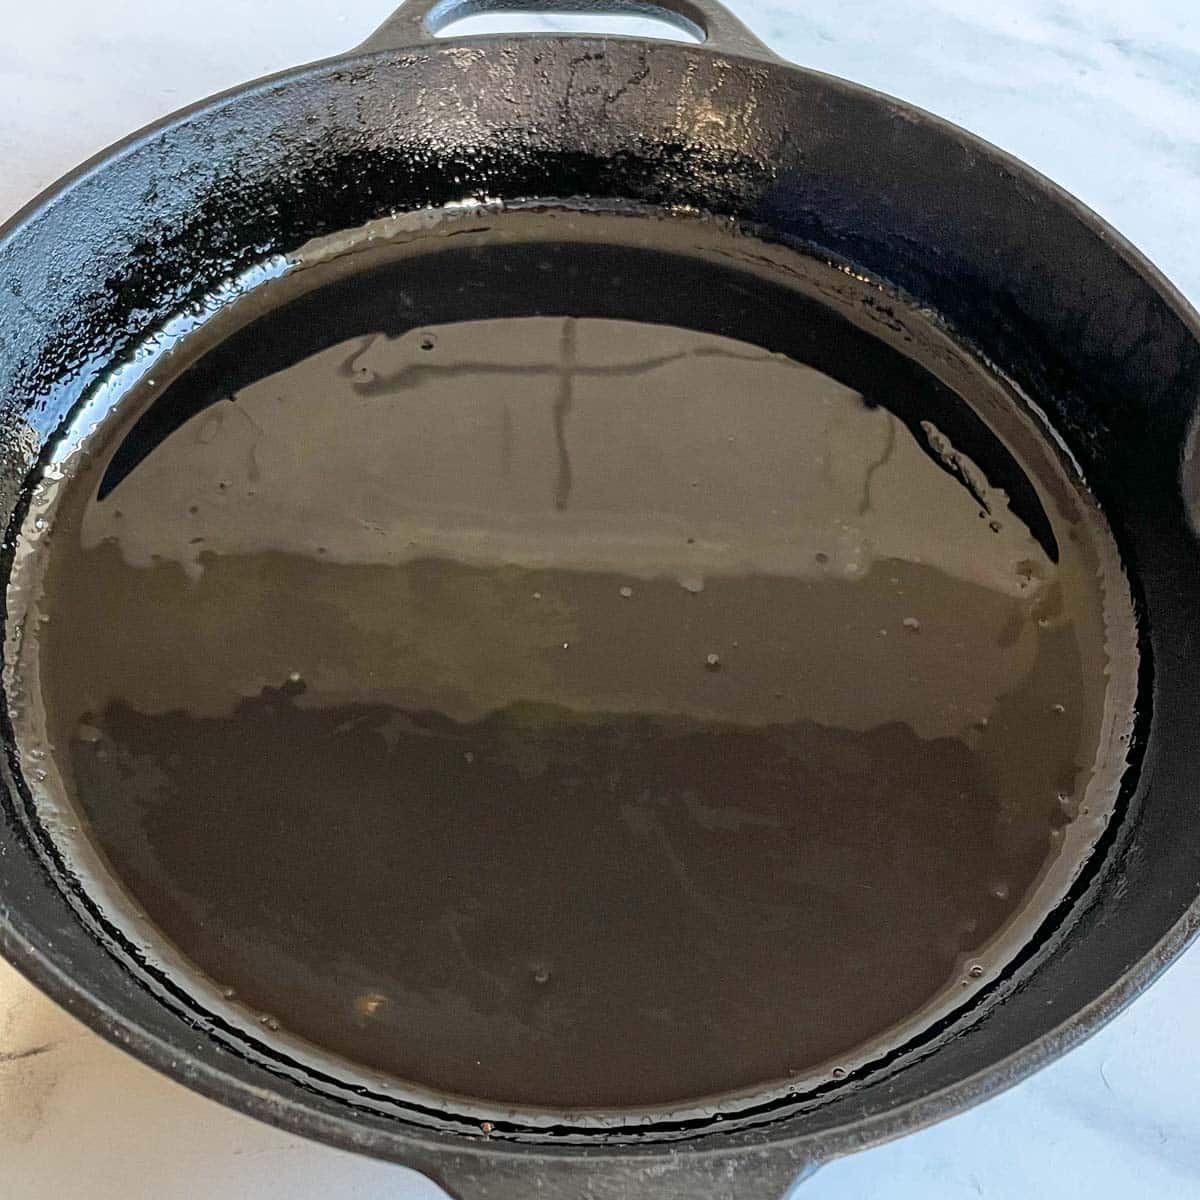 A cast iron pan is shown with a layer of grapeseed oil in the bottom.